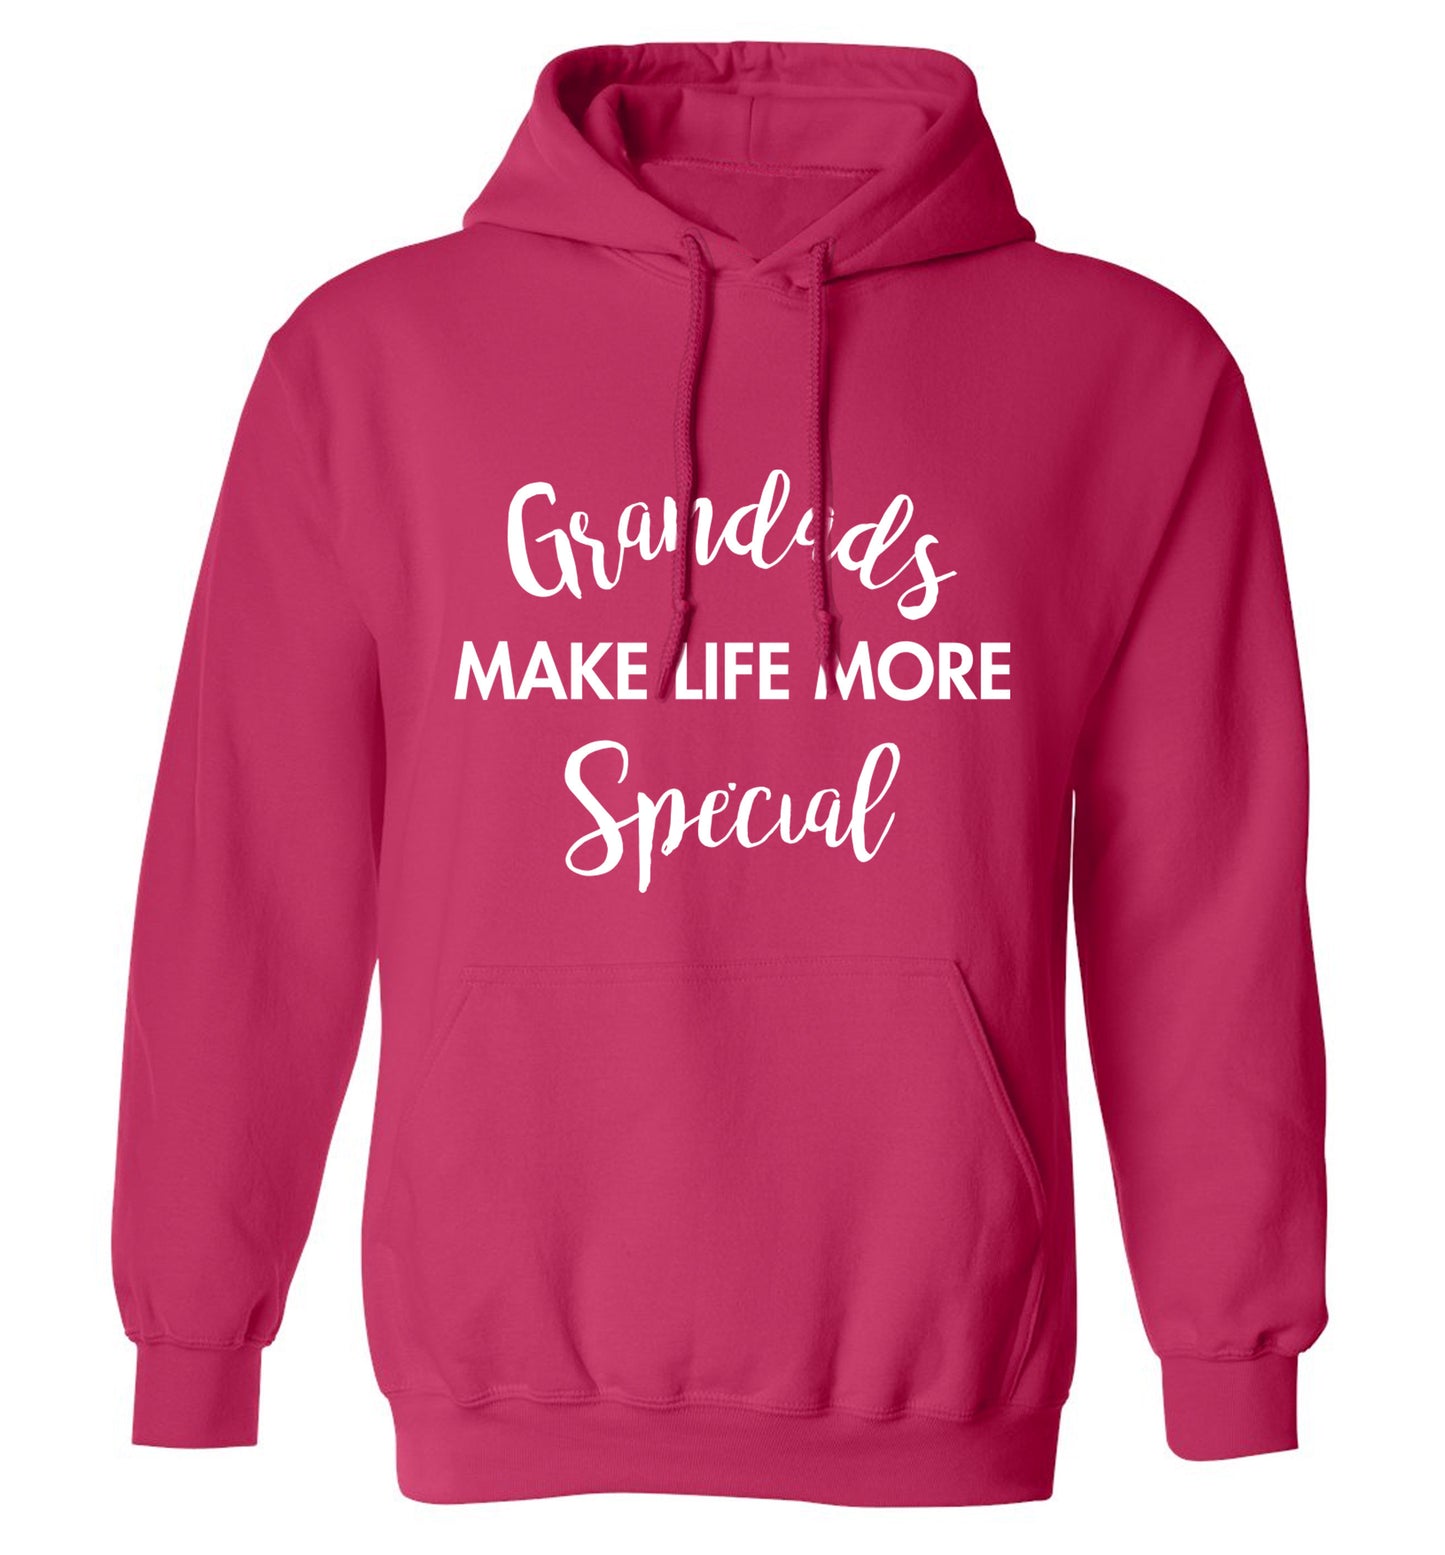 Grandads make life more special adults unisex pink hoodie 2XL